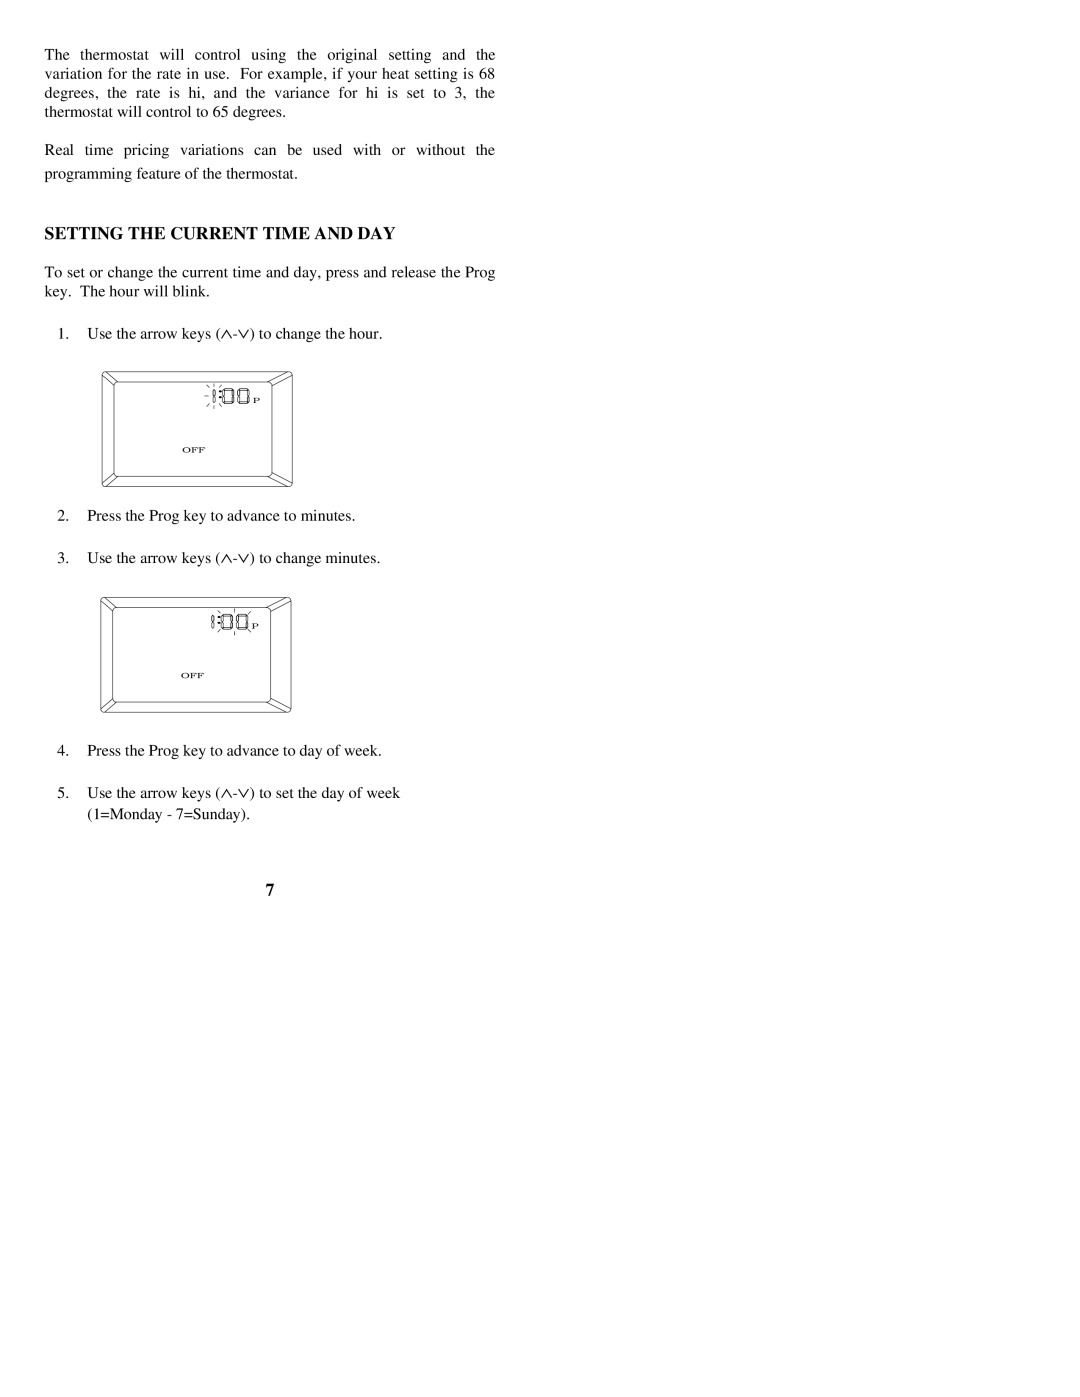 Home Automation RC-81 owner manual Setting The Current Time And Day 